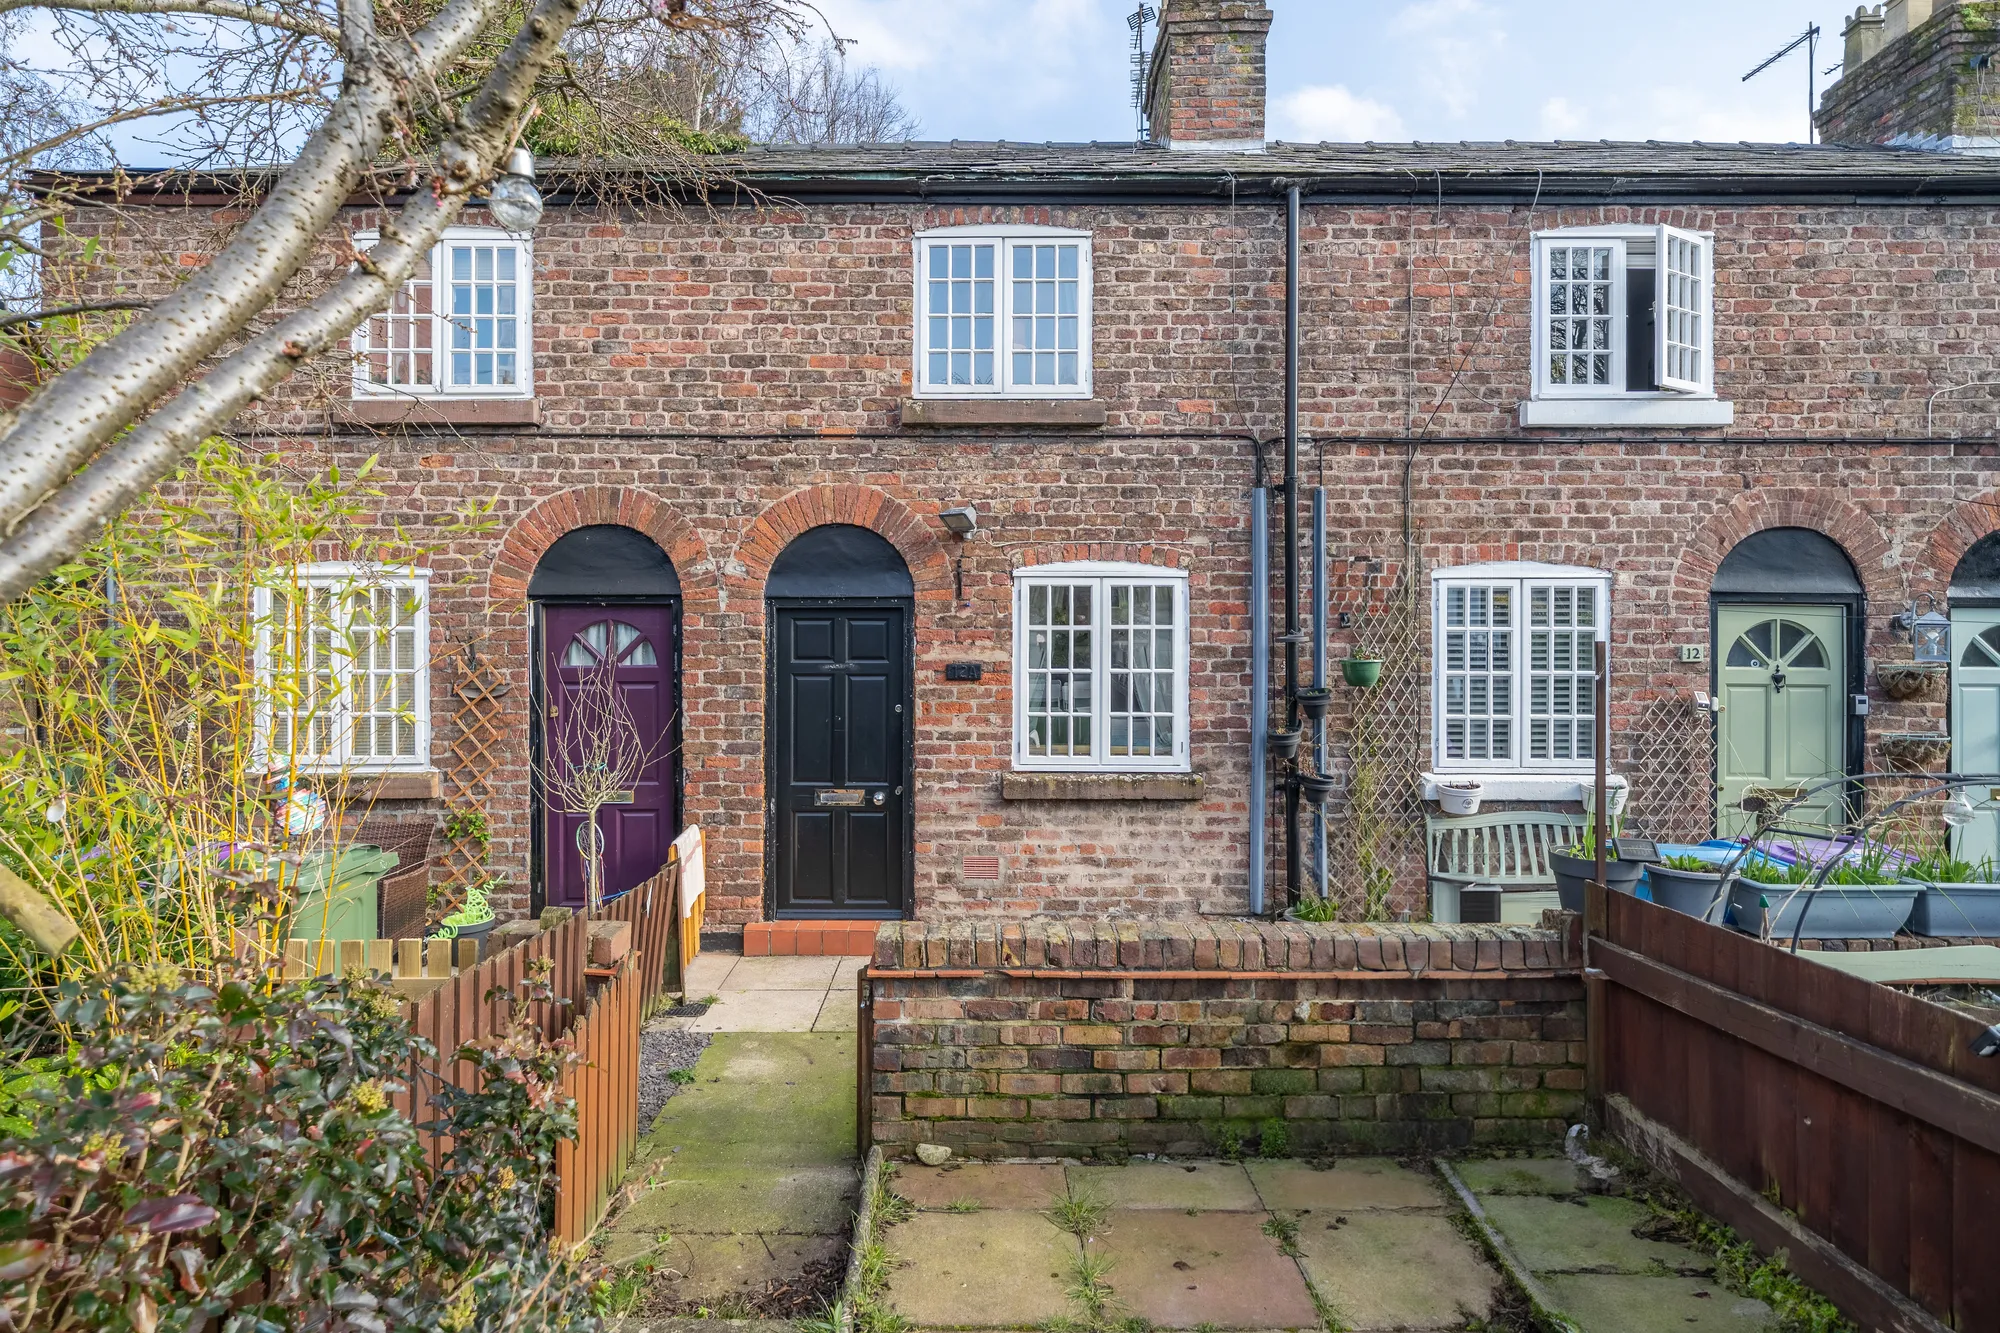 Charming Grade II Listed Cottage in Gateacre Village Conservation Area. 2 bed, character-filled interior, ground floor shower room. Private lawn garden, patio. No chain. A magical oasis combining historic charm with modern living. Ideal for creating lasting memories.